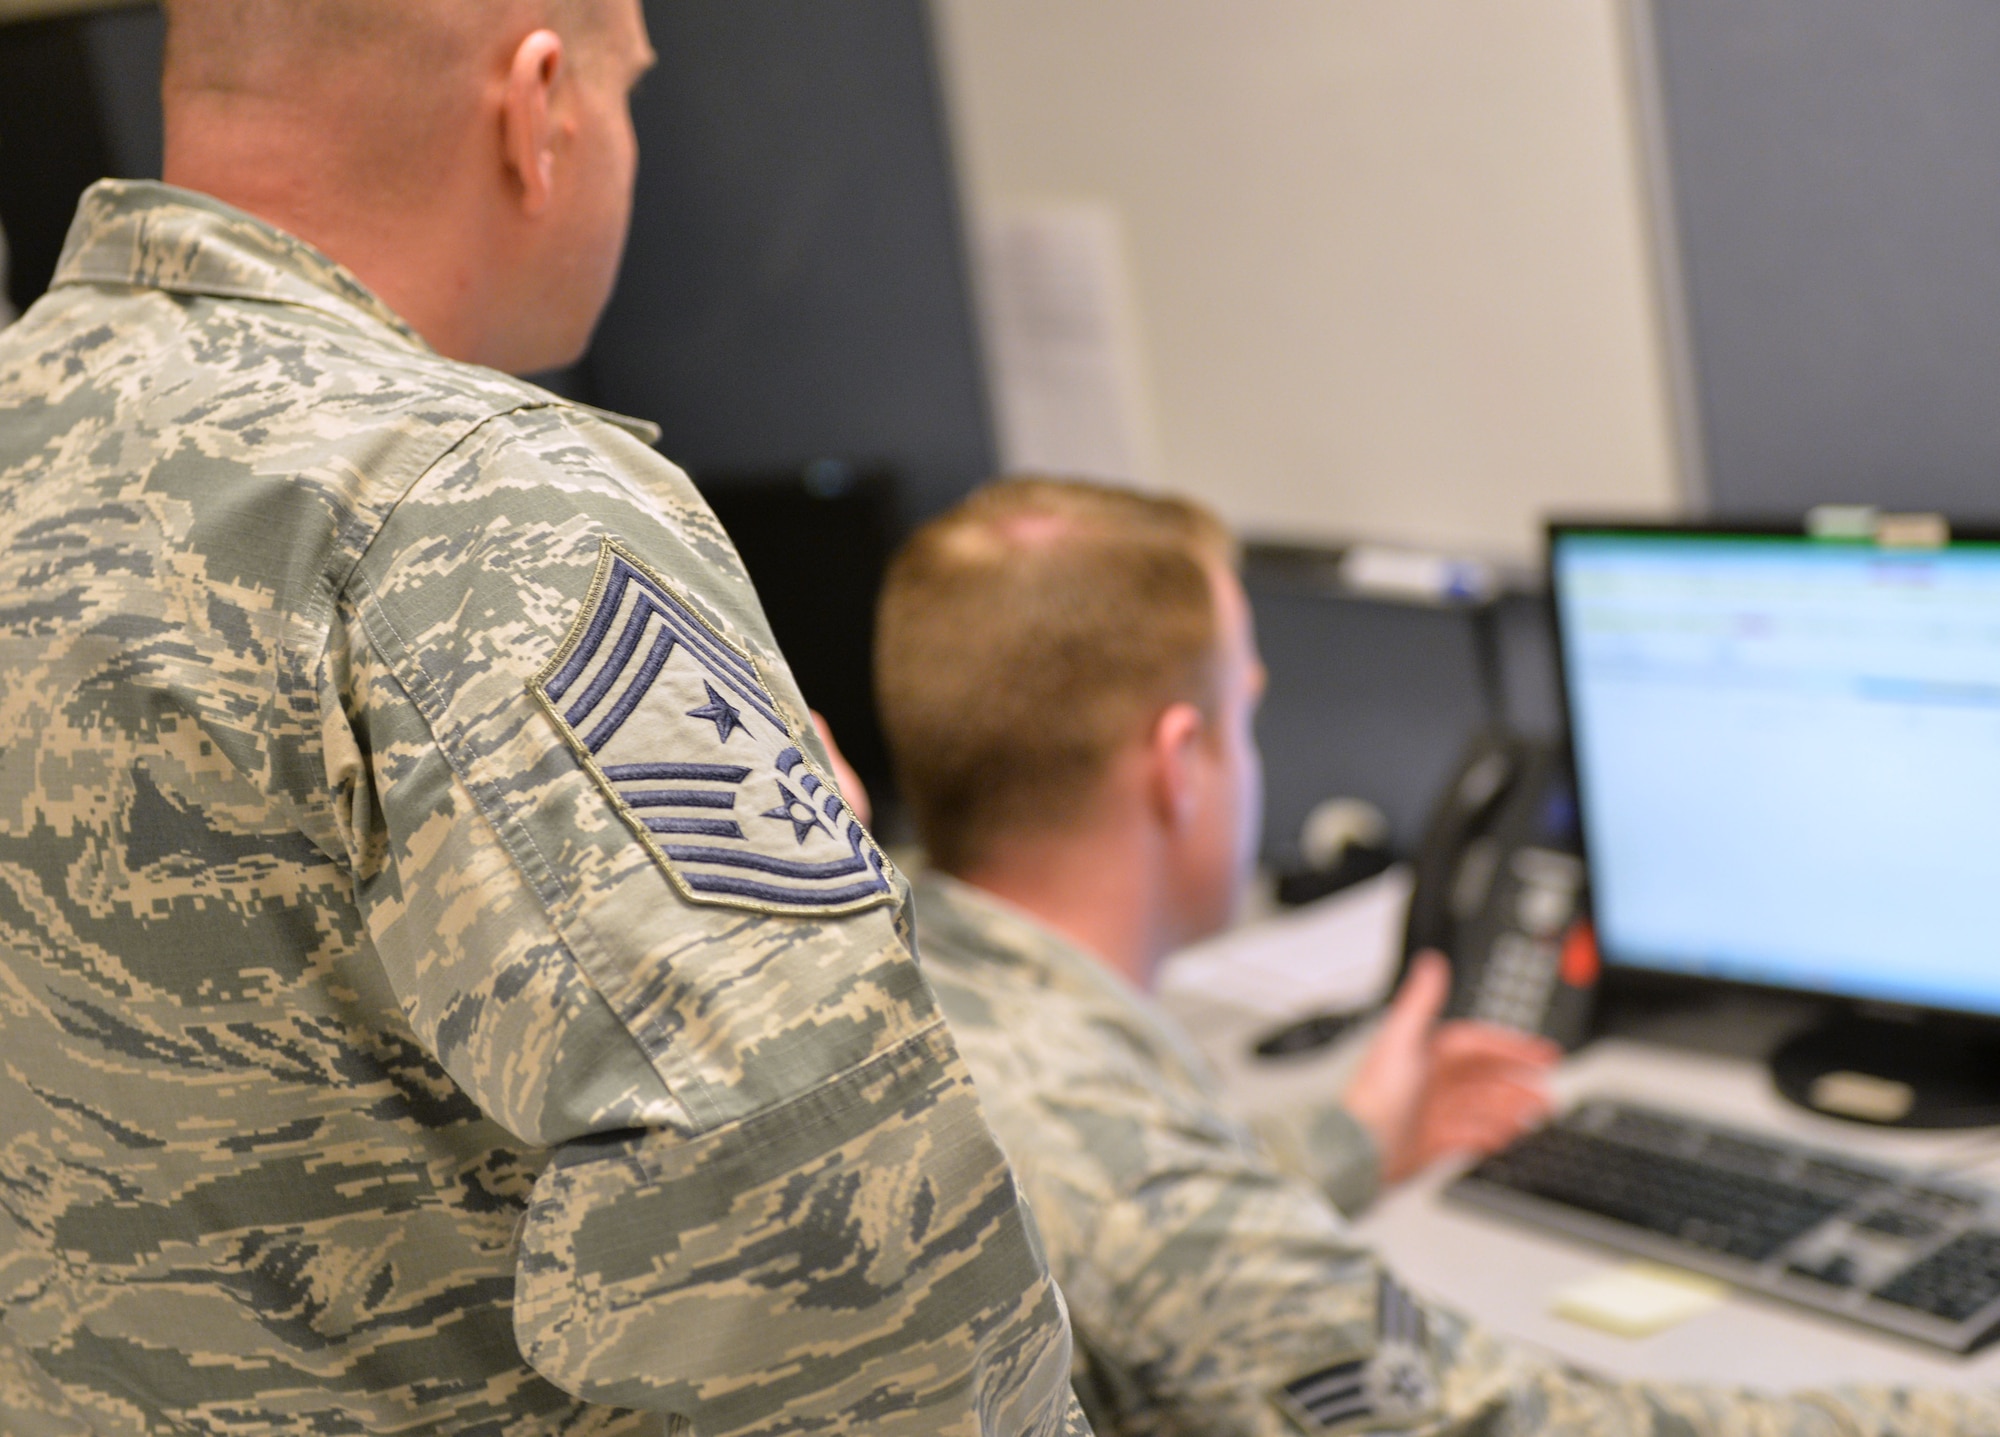 Chief Master Sgt. Michael Ditore, 432nd Wing/432nd Air Expeditionary Wing command chief, left, listens as Senior Airman Robert, 432nd Aircraft Communications Maintenance Squadron ground control station communications mechanic, explains how to fill out post-inspection paperwork Feb. 11, 2016, at Creech Air Force Base, Nevada. As a part of the communications squadron, Cameron is responsible for performing inspections on the ground control station. (U.S. Air Force photo by Senior Airman Christian Clausen/Released)